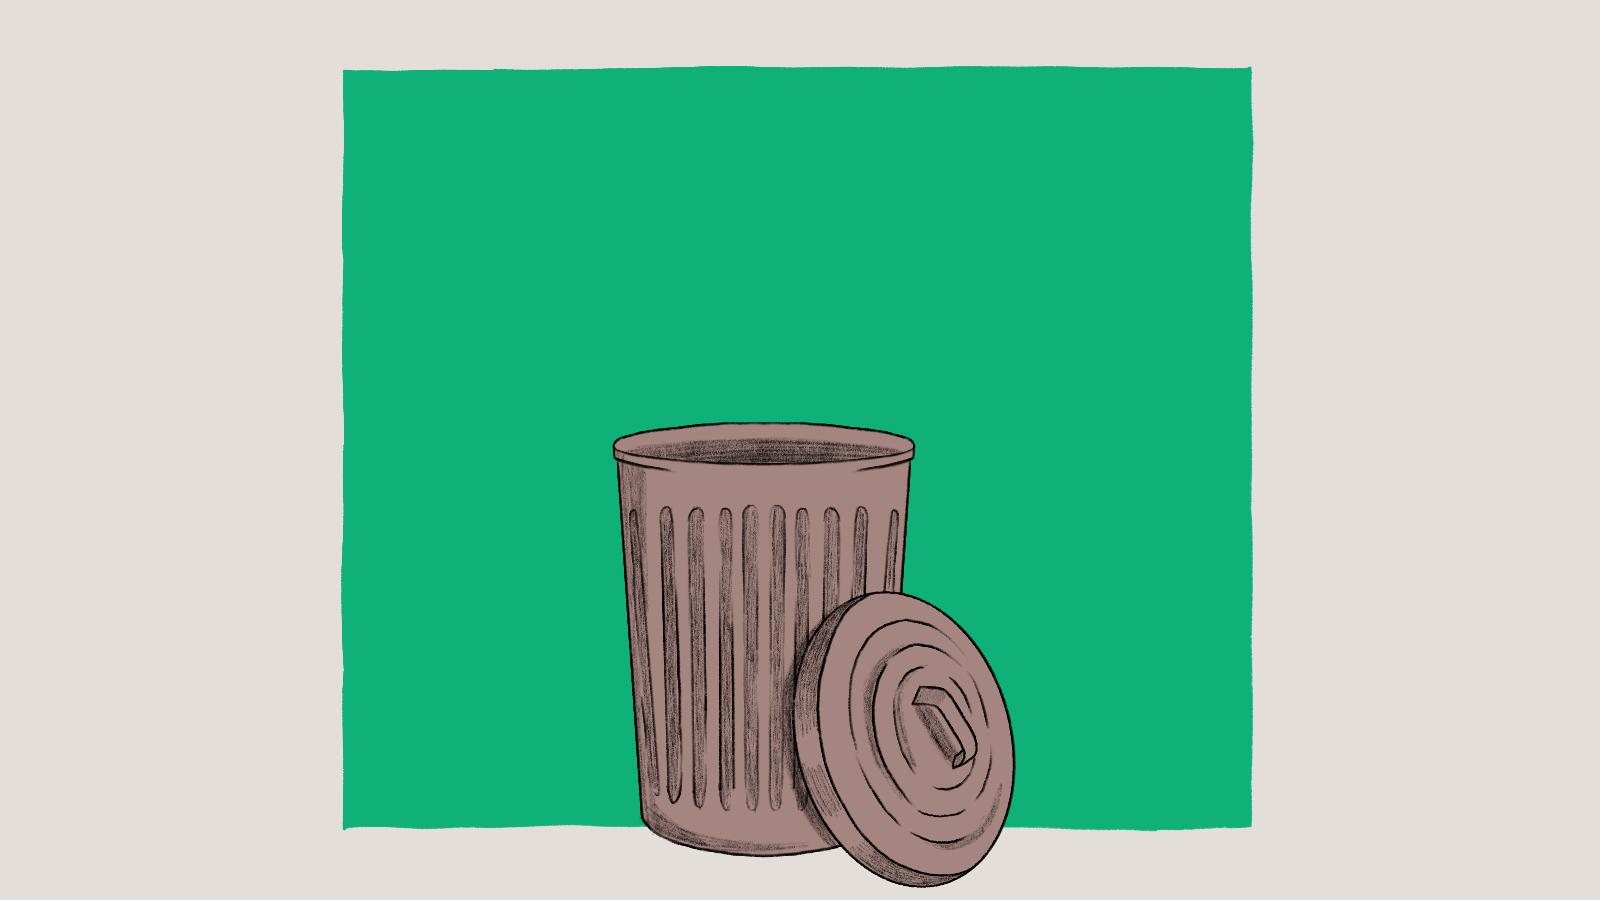 Animation of a yogurt container following the shape of a recycling symbol into a trash can